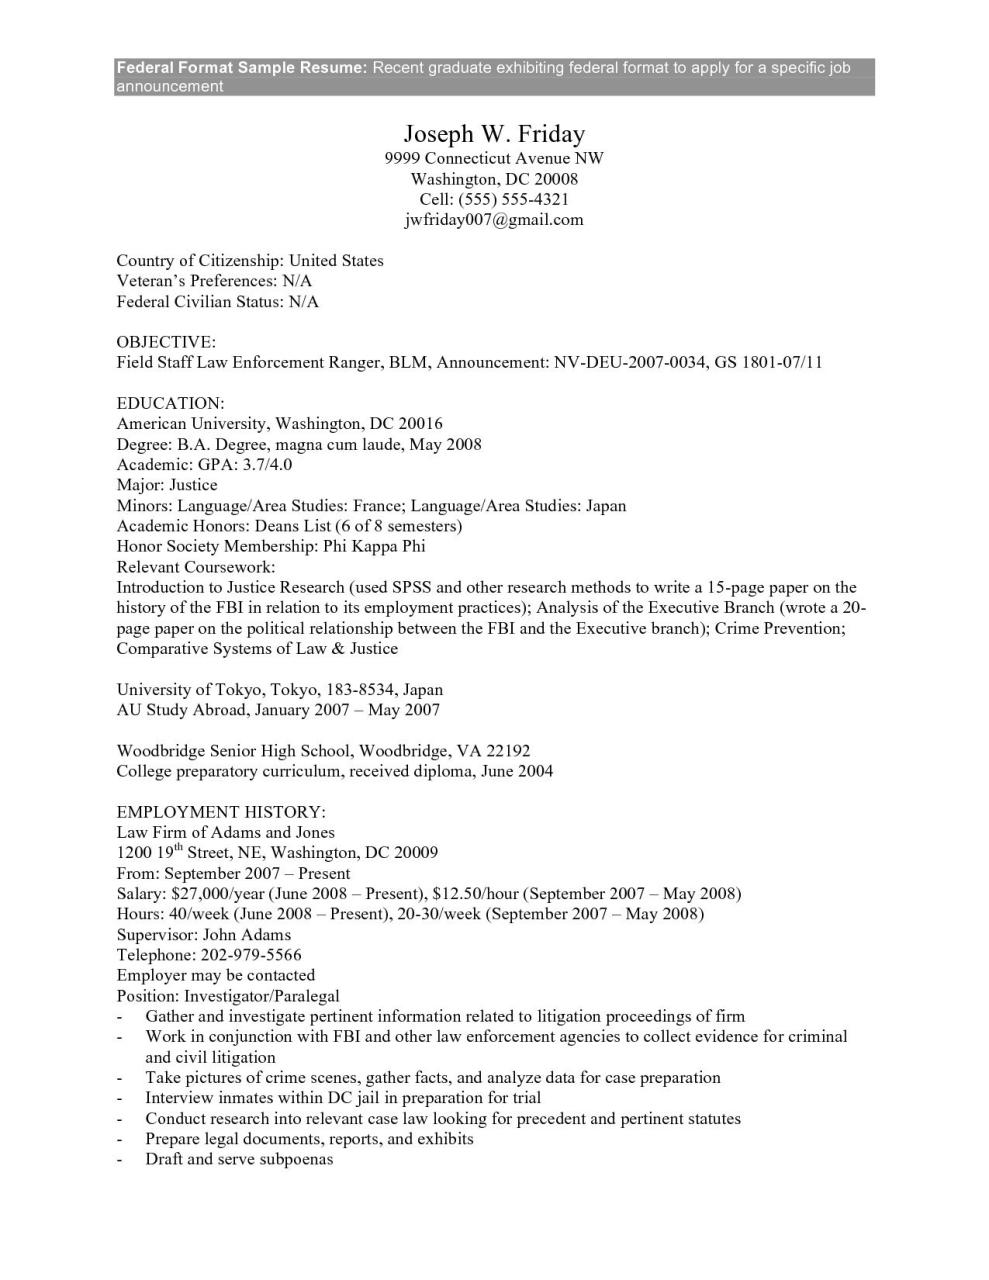 How To Cite Military Experience On Resume Resume Samples